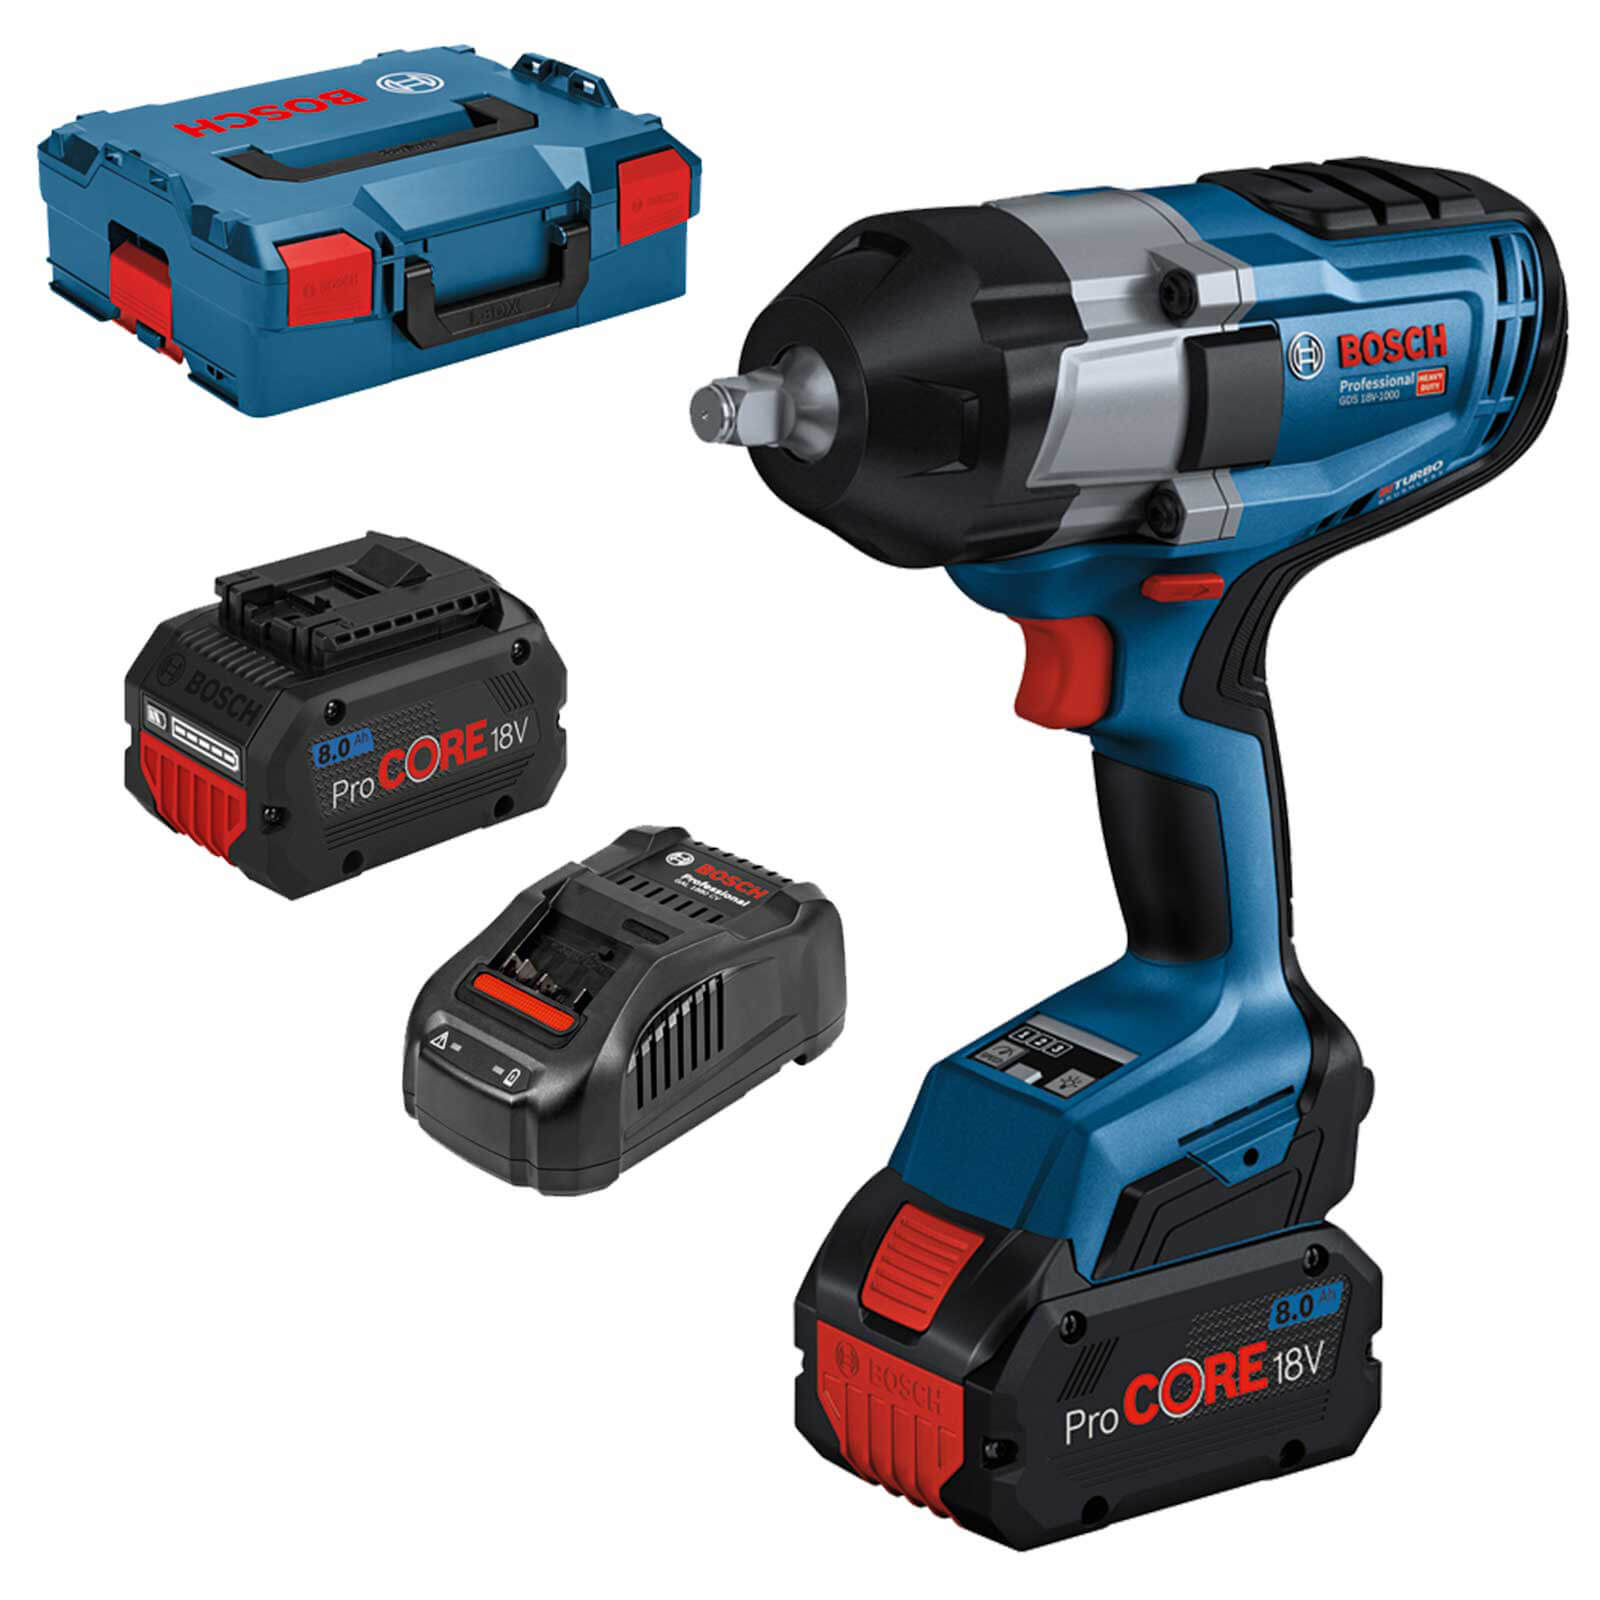 Photo of Bosch Gds 18v-1000 Biturbo 18v Cordless Brushless High Torque ½” Drive Impact Wrench 2 X 8ah Li-ion Charger Case